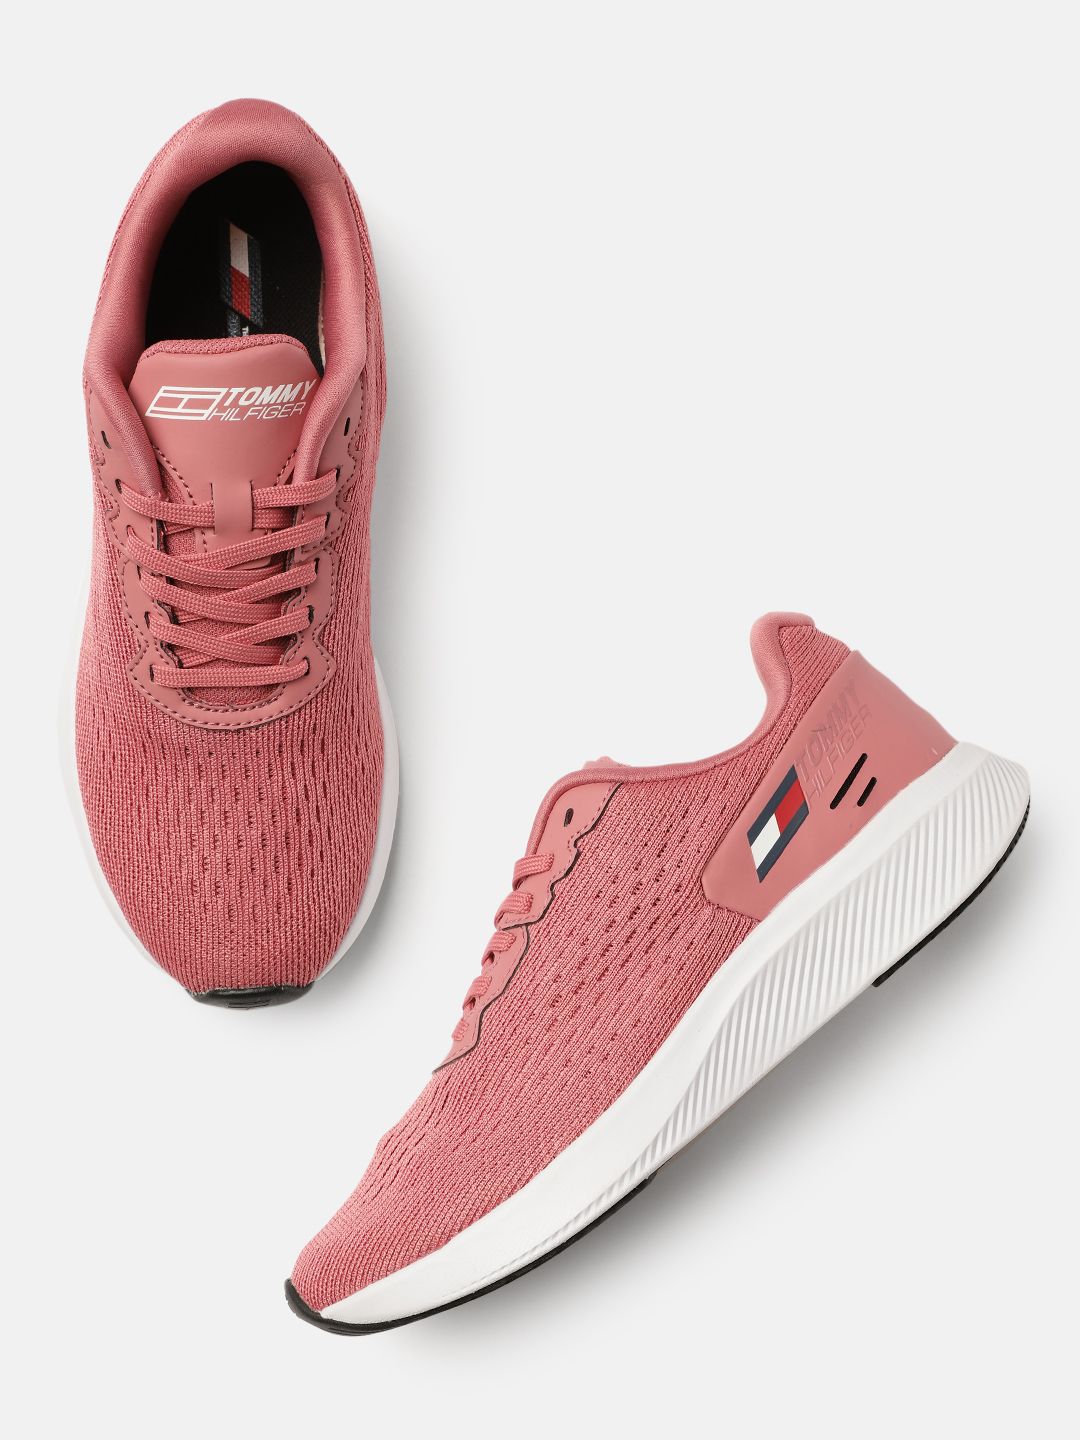 Tommy Hilfiger Women Dark Coral Pink Textured Regular Sneakers With Tech Foam Midsole Price in India